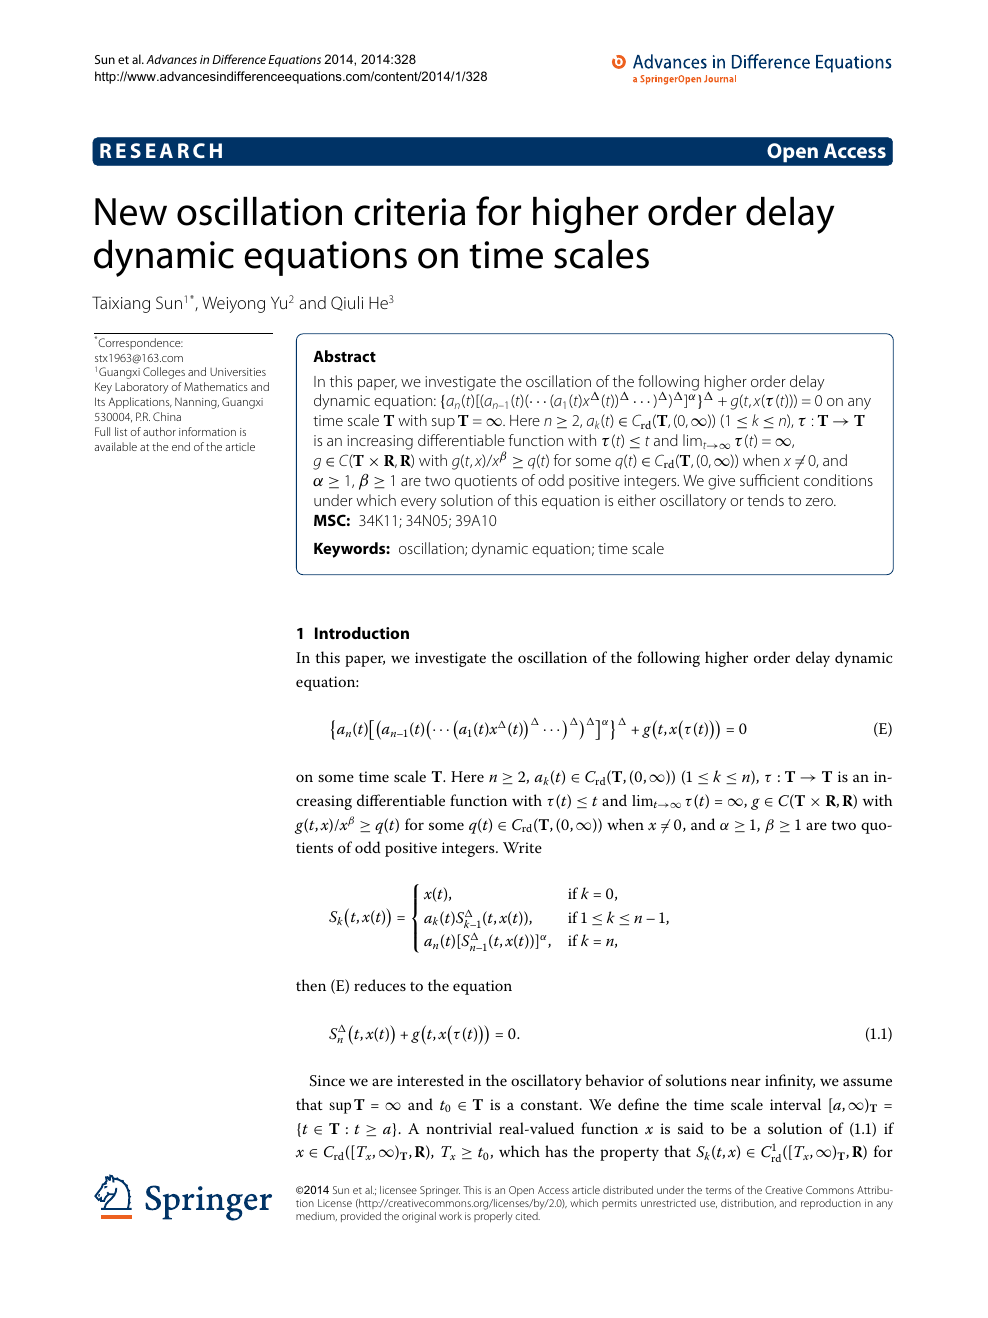 New Oscillation Criteria For Higher Order Delay Dynamic Equations On Time Scales Topic Of Research Paper In Mathematics Download Scholarly Article Pdf And Read For Free On Cyberleninka Open Science Hub